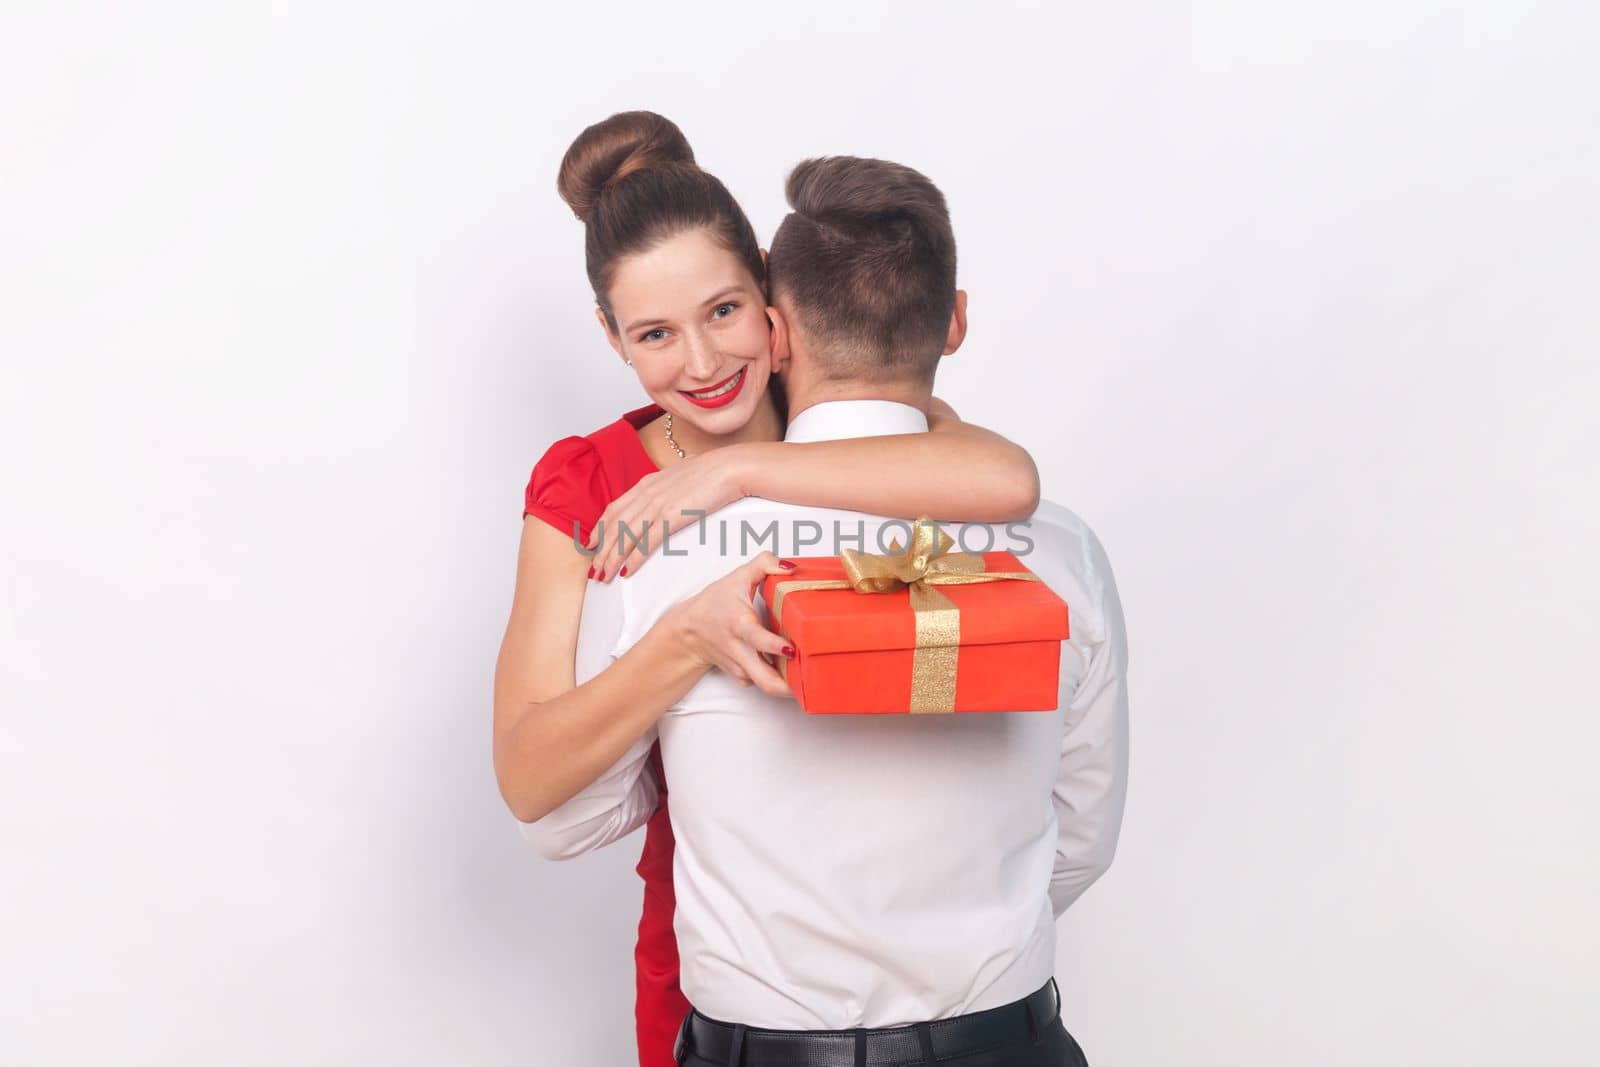 Smiling woman and man in elegant clothes standing together, guy posing backwards, his wife hugging him and holding present box. Indoor studio shot isolated on gray background.